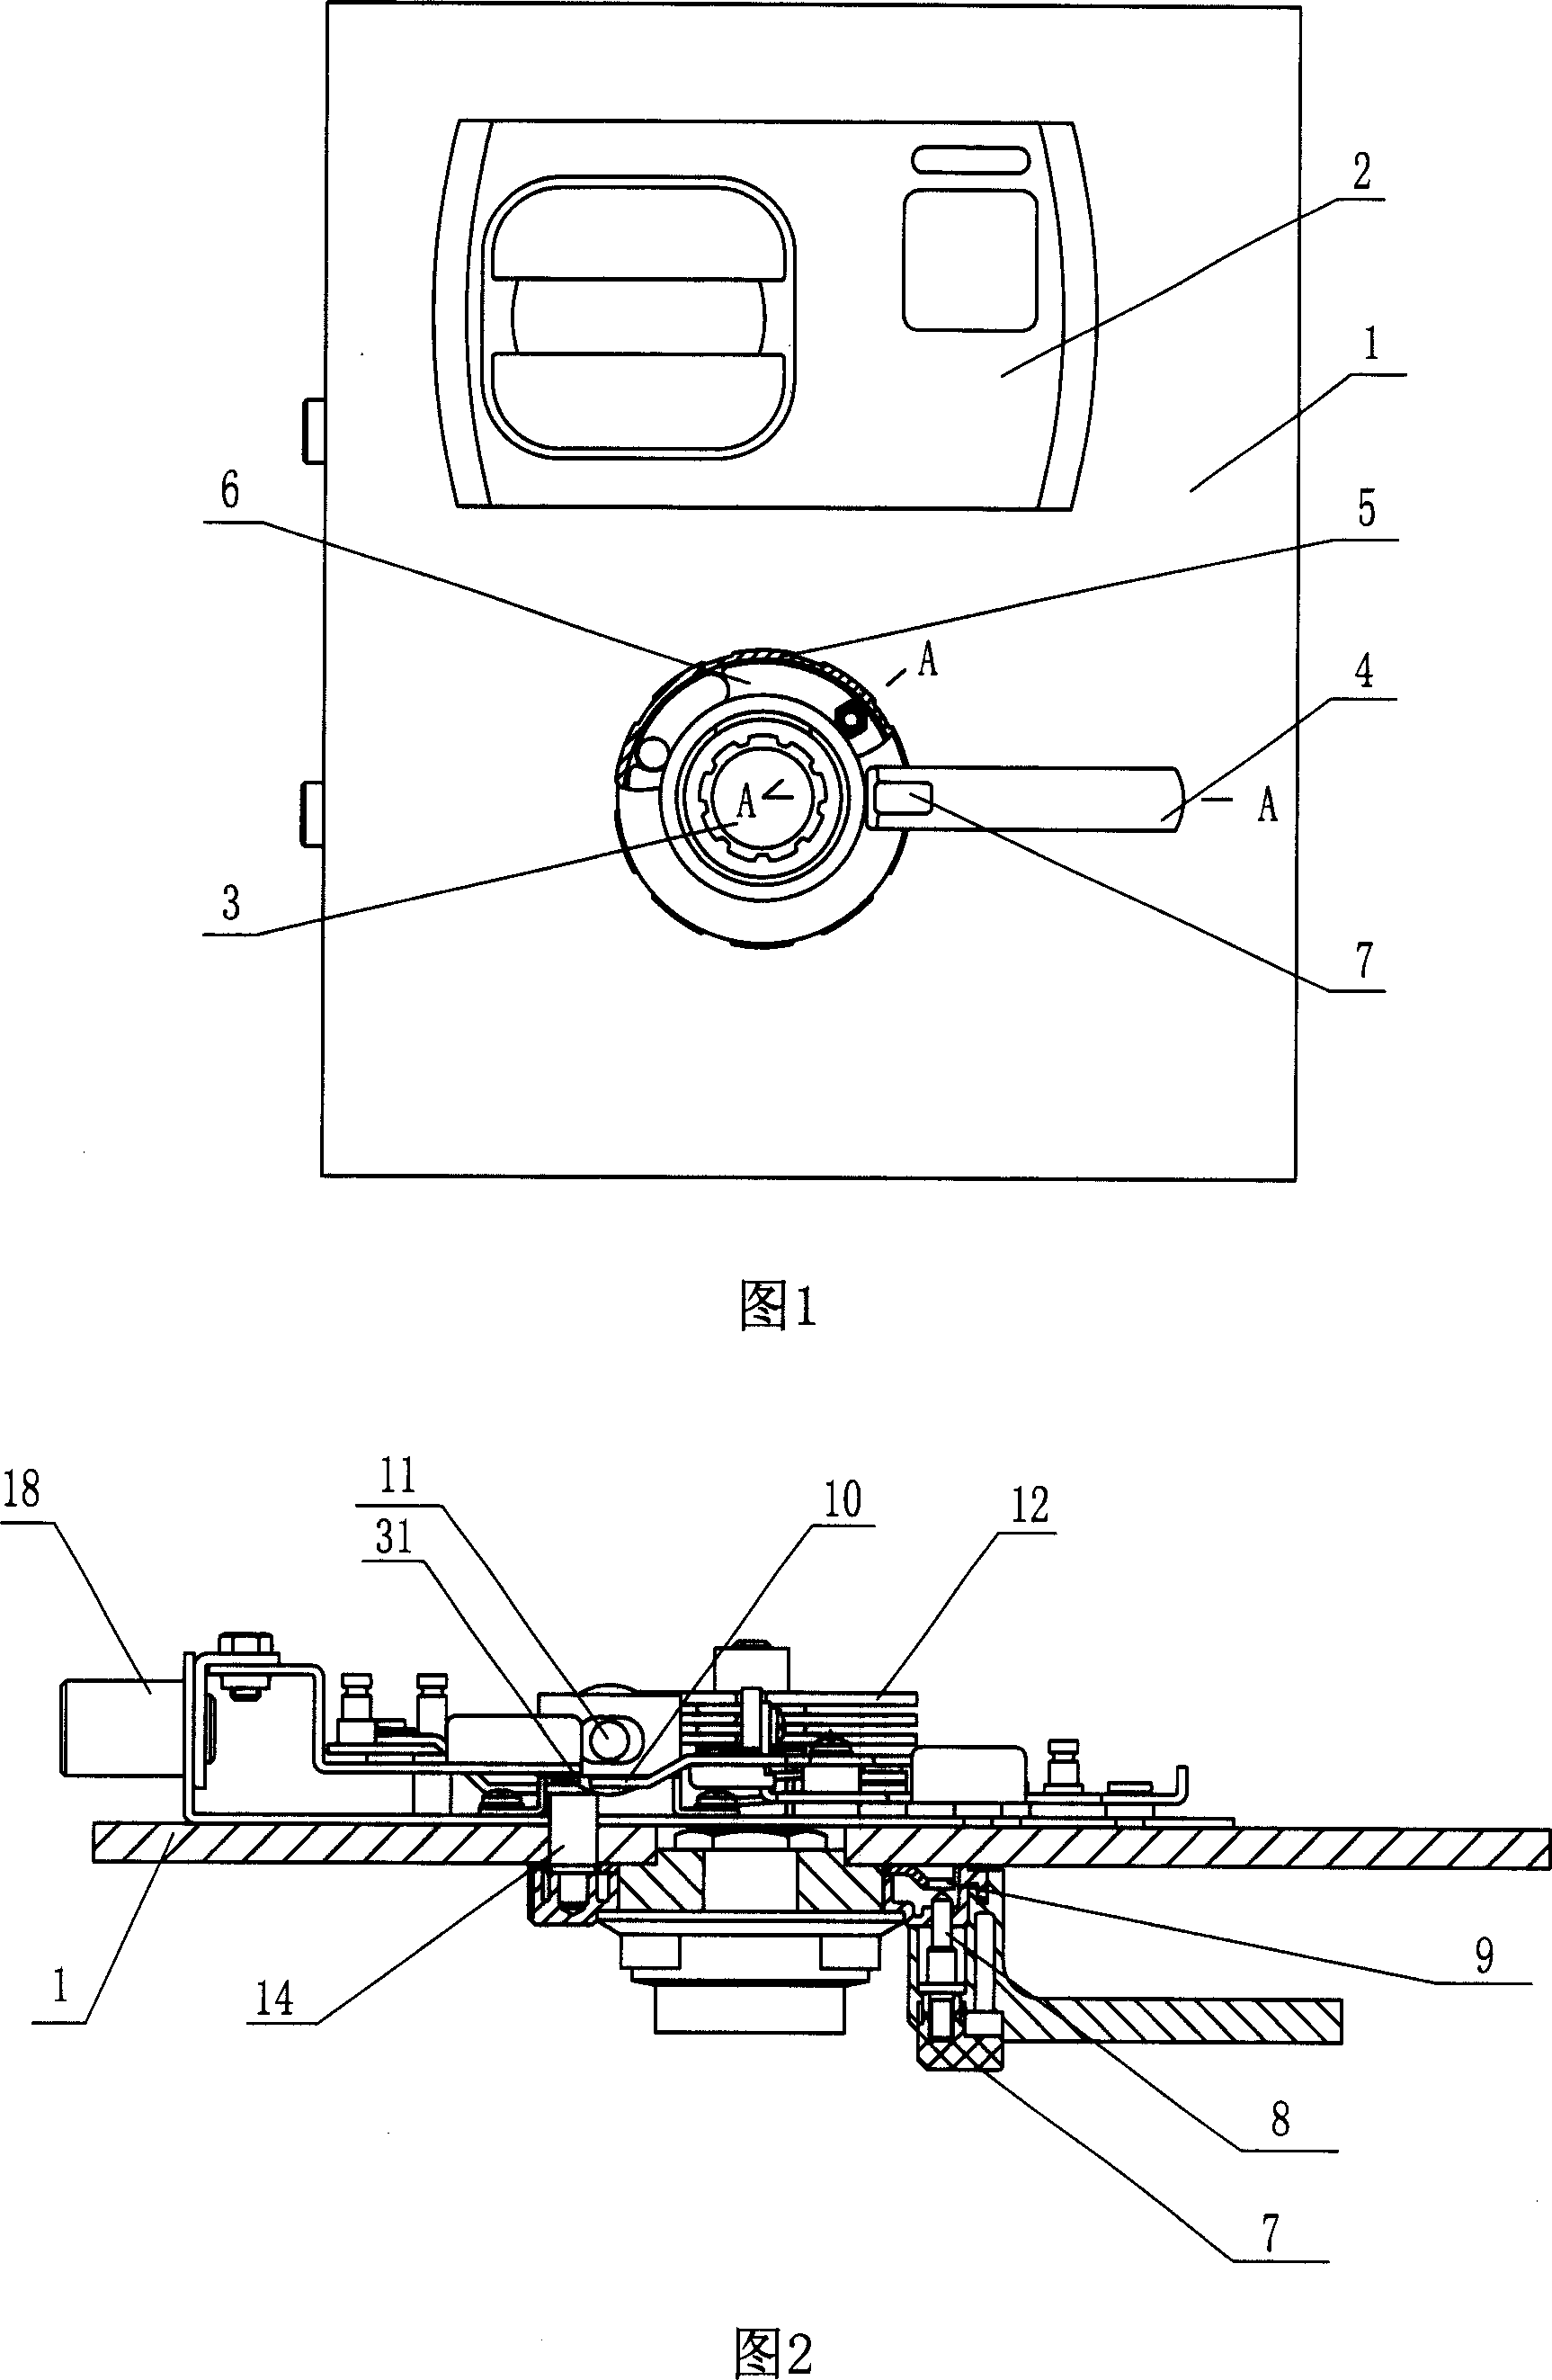 Composition type lock in use for safe deposit box